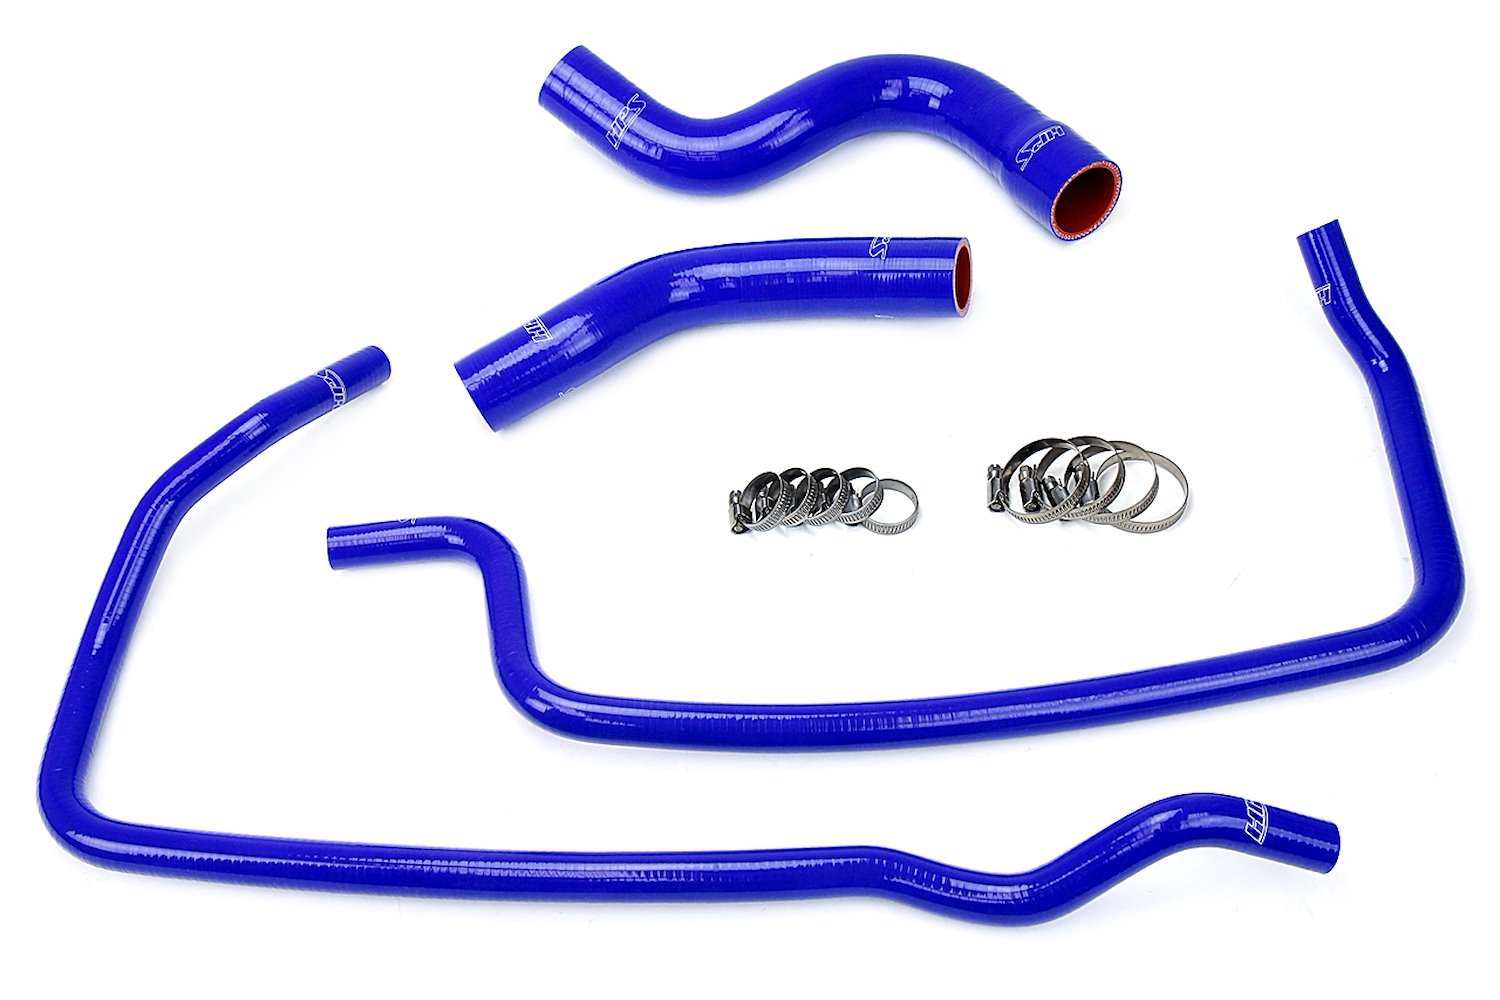 57-1449-BLUE Coolant Hose Kit, High-Temp 3-Ply Reinforced Silicone, Replace Rubber Radiator Heater Coolant Hoses